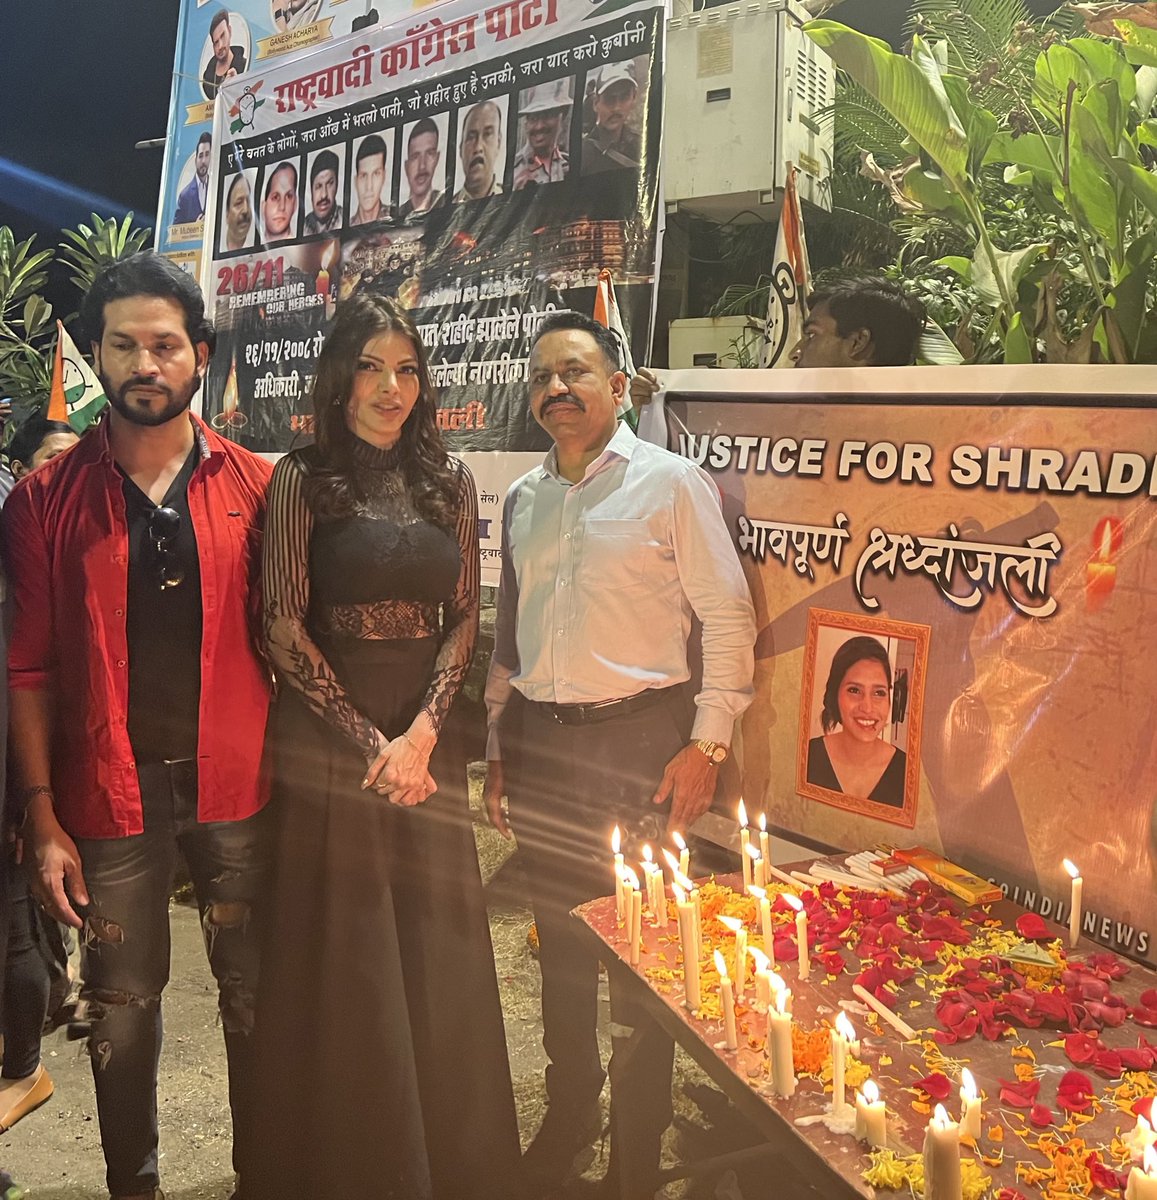 #AboutLastNight #CandleMarch 
#JusticeForShraddha 
Special thanks to ACP Raj Khatib and Team S9 India News 🙏🏻